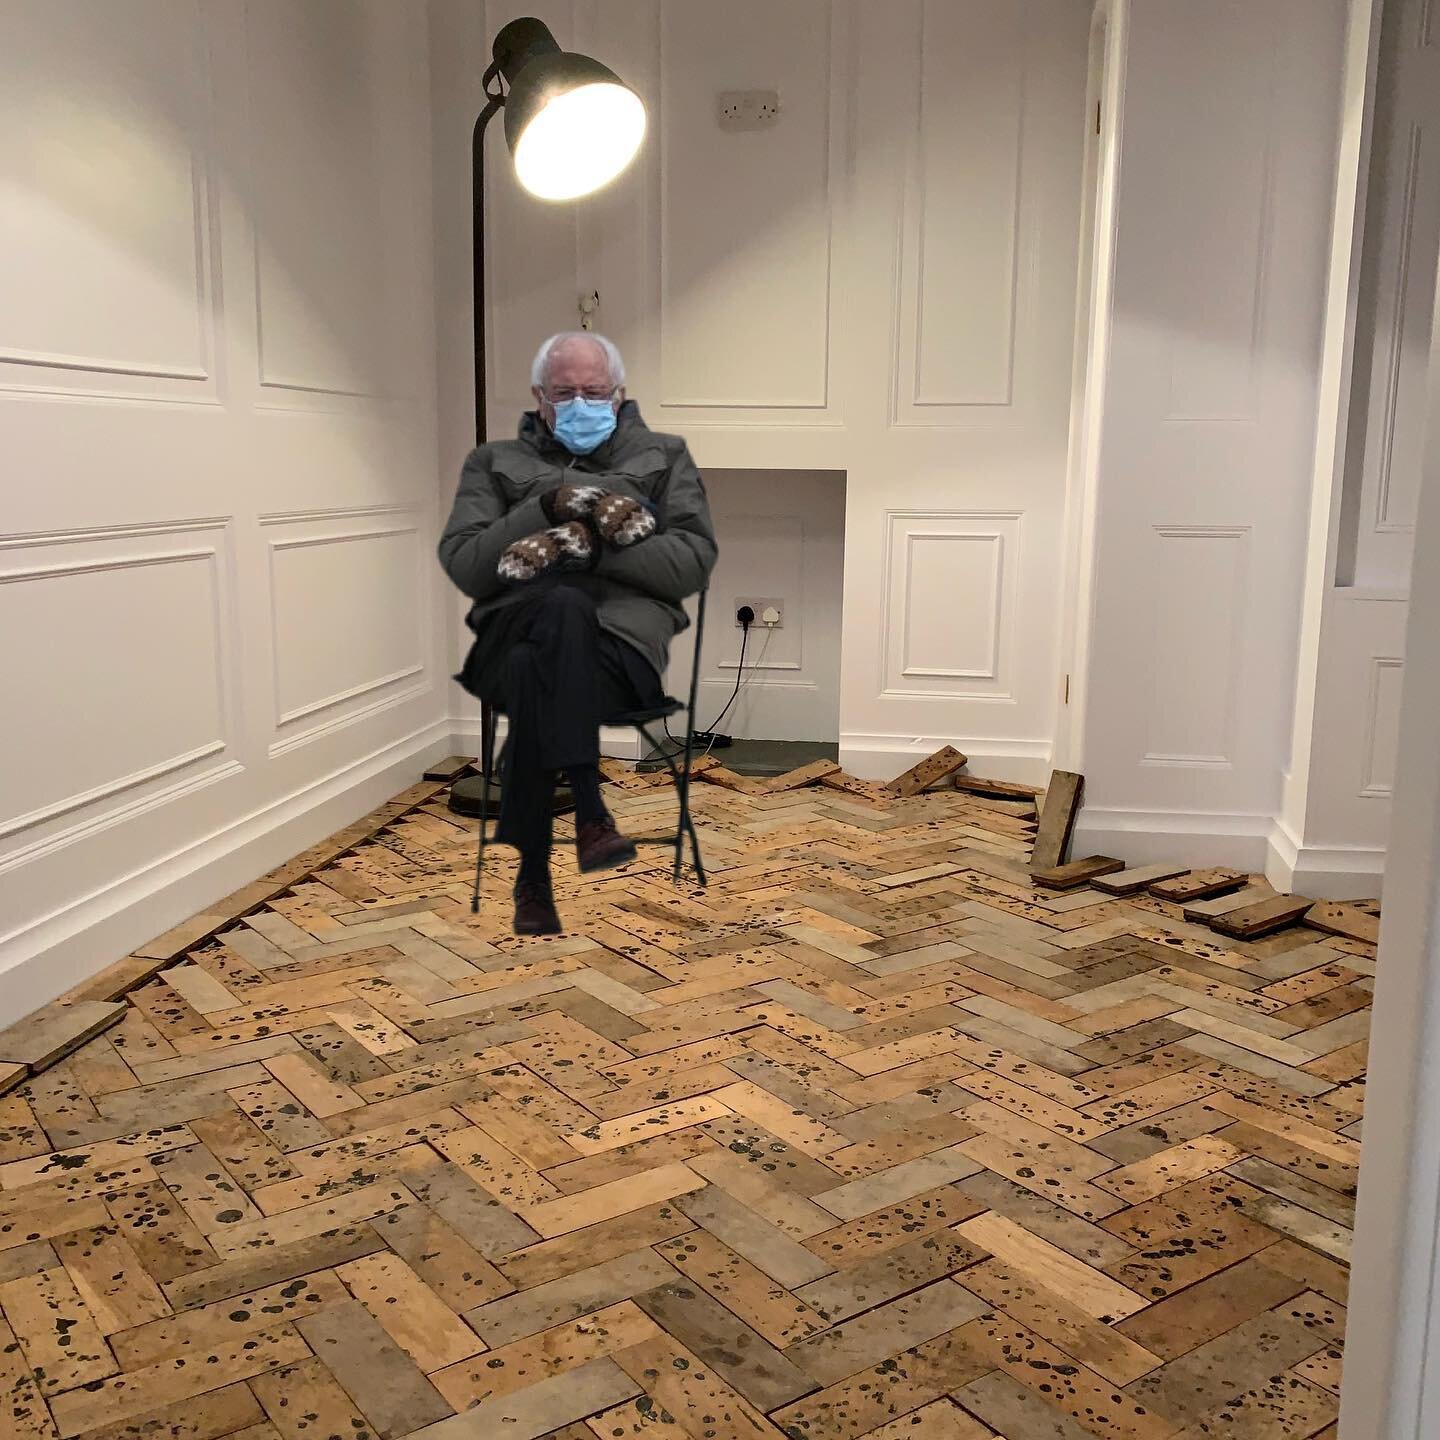 Just patiently waiting for the parquet to get Bernie sanded.... This is taking longer than expected! 😂
.
.
.
.
.
.
#interiorlovers #topstylefiles #doityourself
#finditstyleit #farrowandball #georgiantownhouse #periodhome #georgianhome #picoftheday #